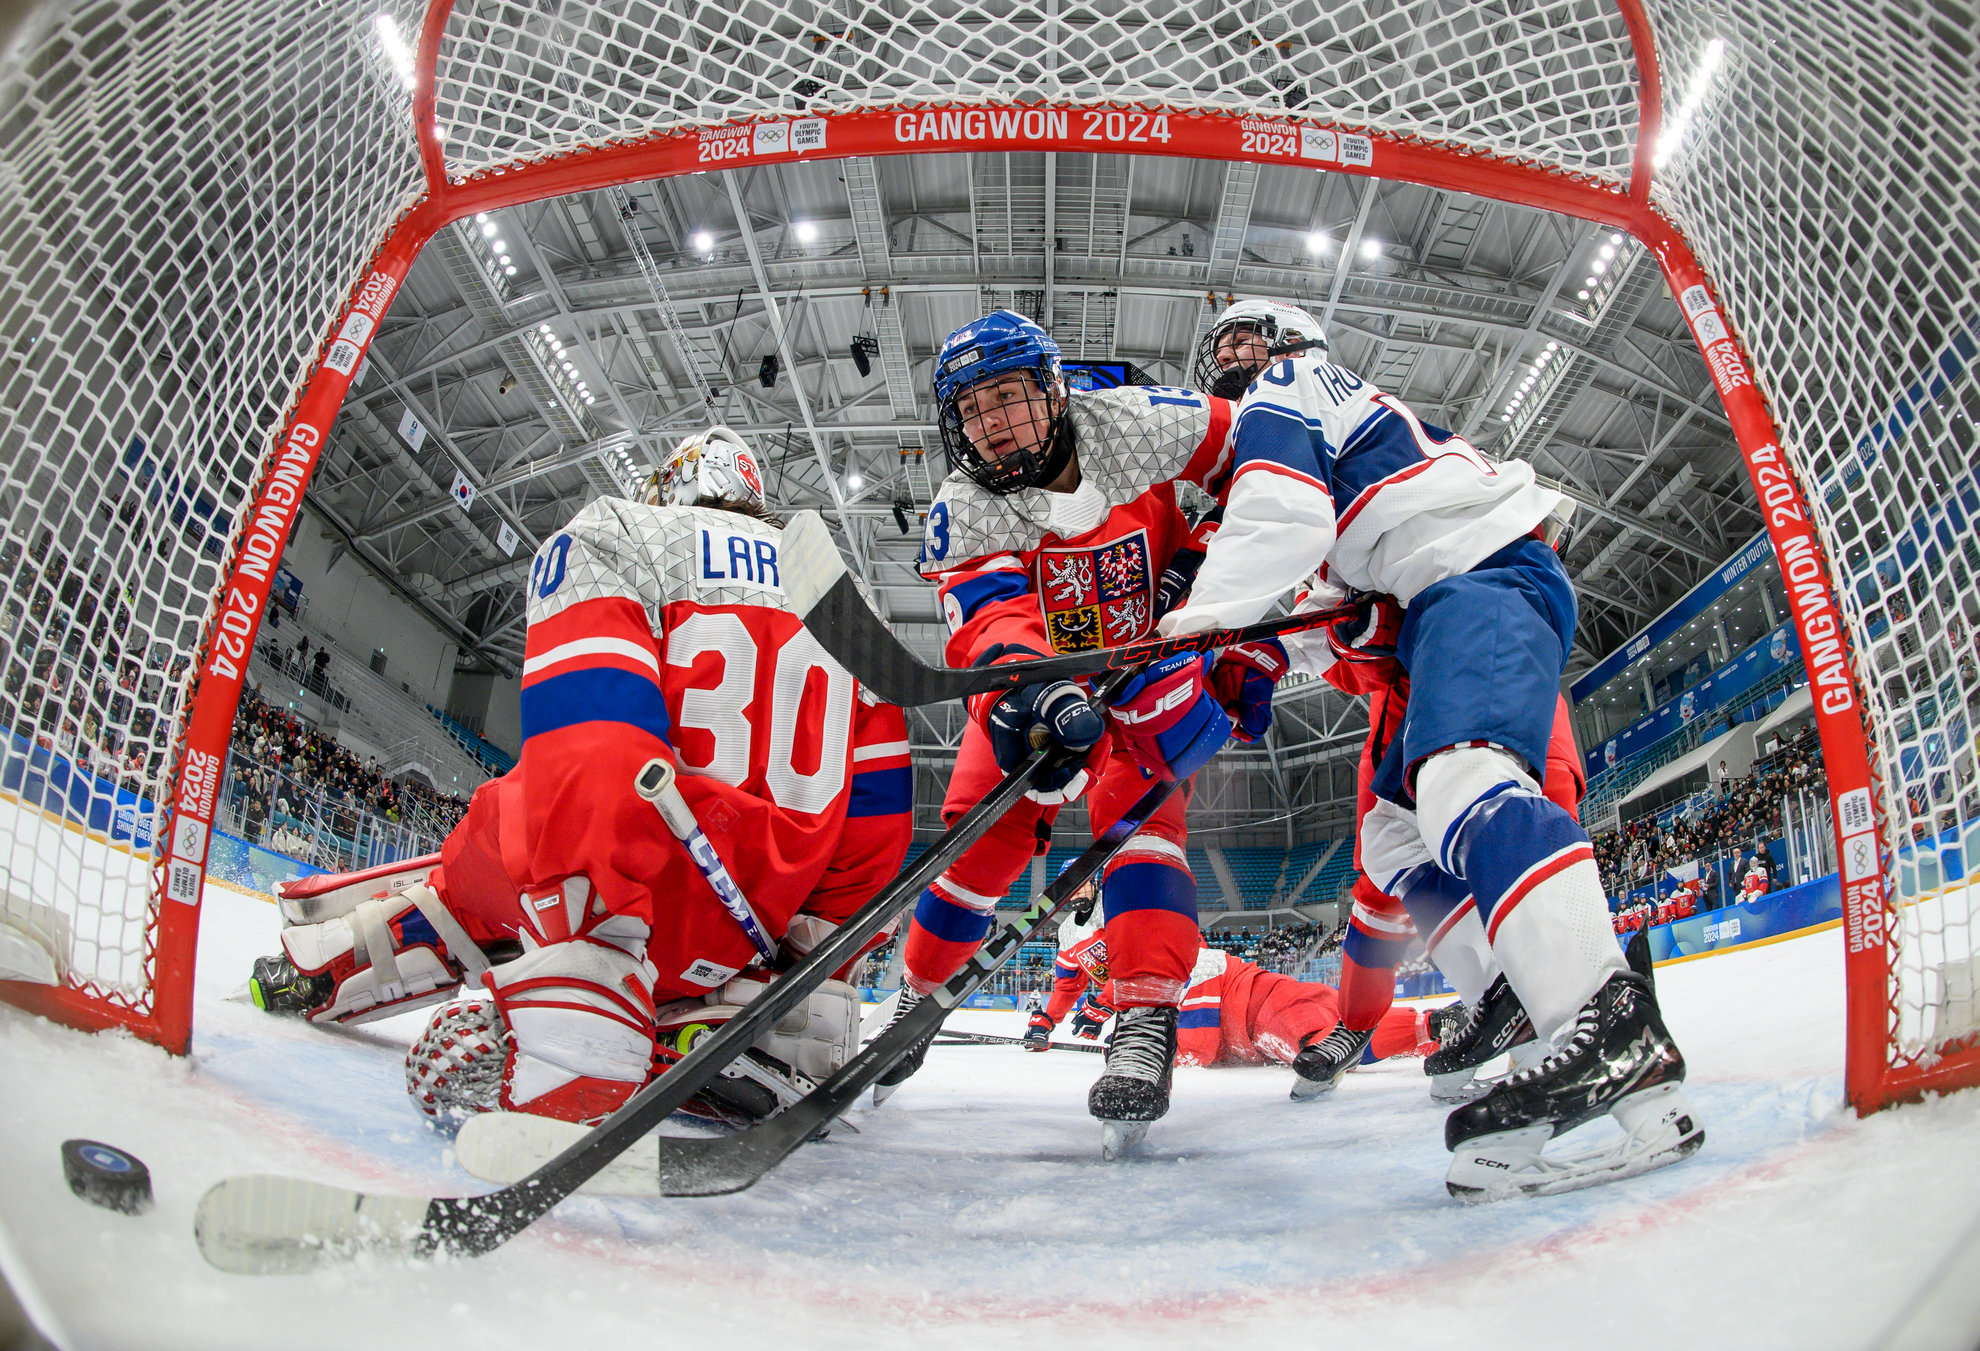 The preliminary round of men's six-on-six ice hockey on Jan. 29 pits the Czech Republic against the U.S. at Gangneung Hockey Centre as part of the Gangwon Winter Youth Olympics in Gangwon-do Province. 